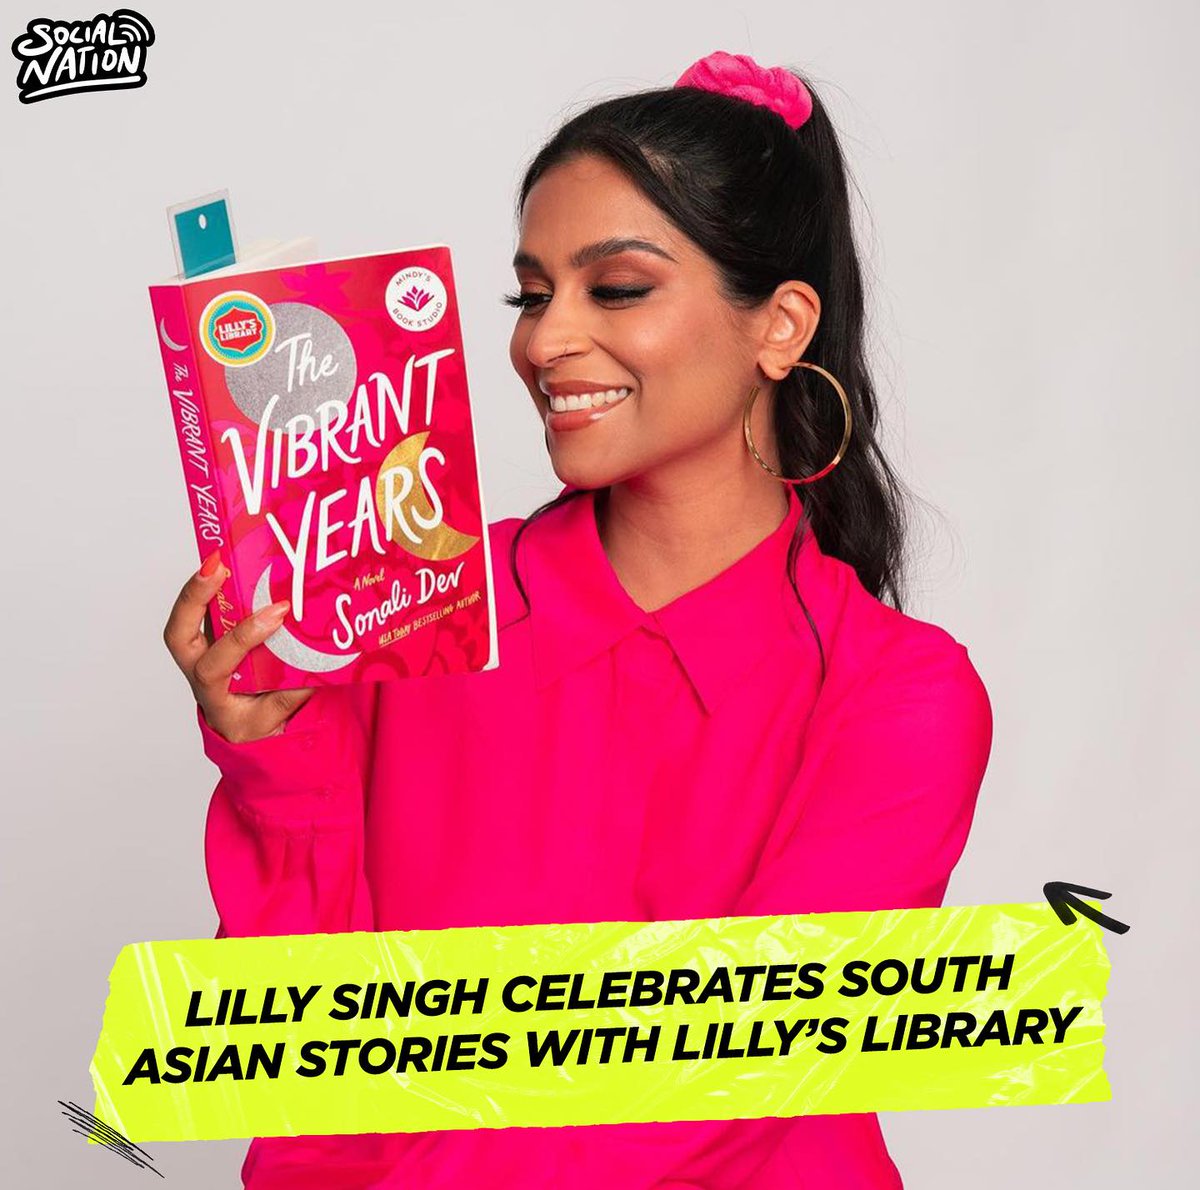 The OG creator Lilly Singh wins our hearts once again with her book club: 'lilly's library', which curates & celebrates South Asian voices and stories. While these picks are something special to our desi souls, Lilly believes these books are for everyone. 

#lillysingh #books